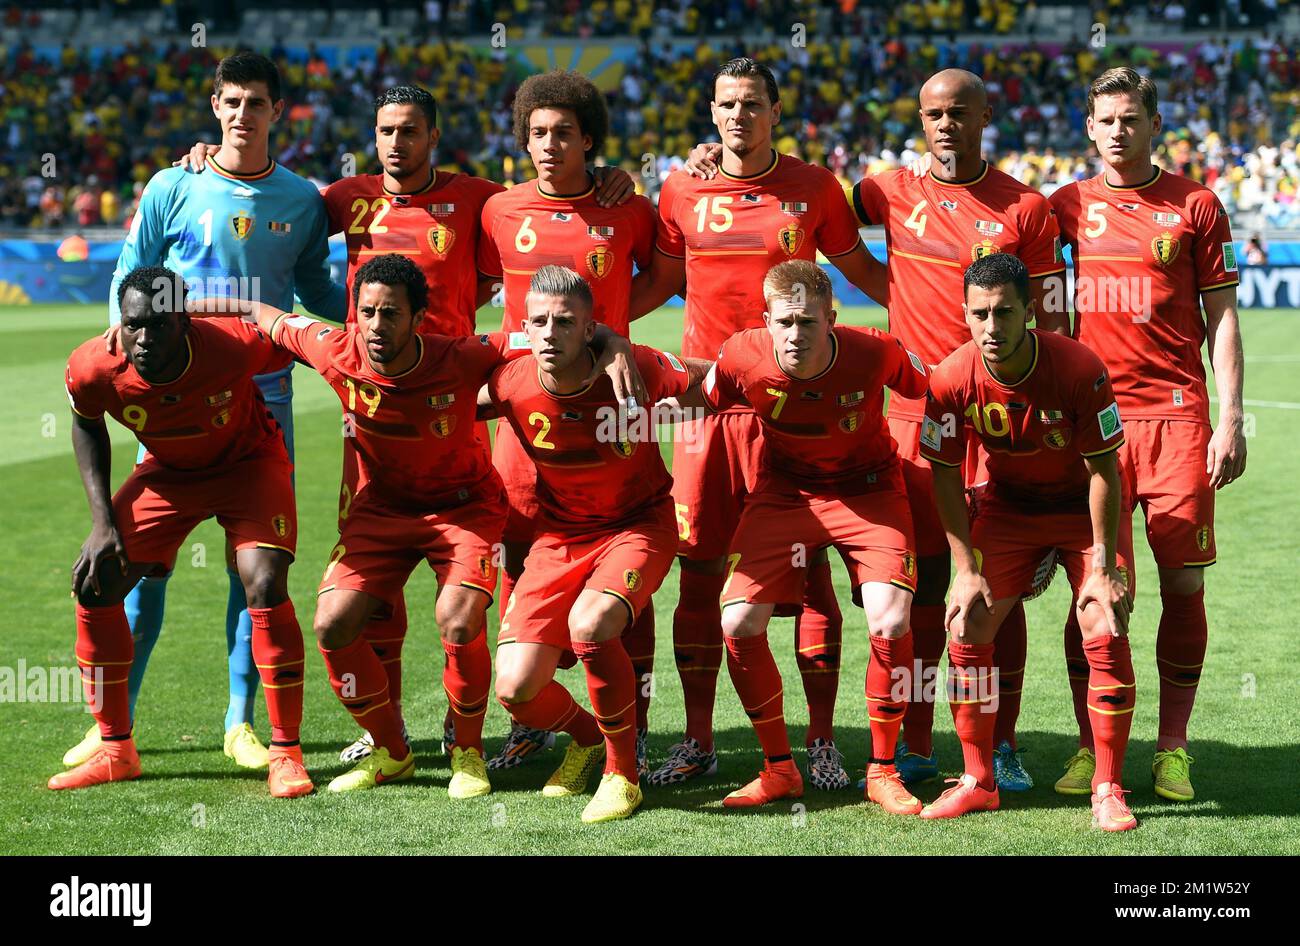 Belgian players pose for the family (team) picture ahead of a soccer game between Belgian national team The Red Devils and Algeria in Belo Horizonte, Brazil, the first game in Group H of the first round of the 2014 FIFA World Cup, Tuesday 17 June 2014.  Stock Photo